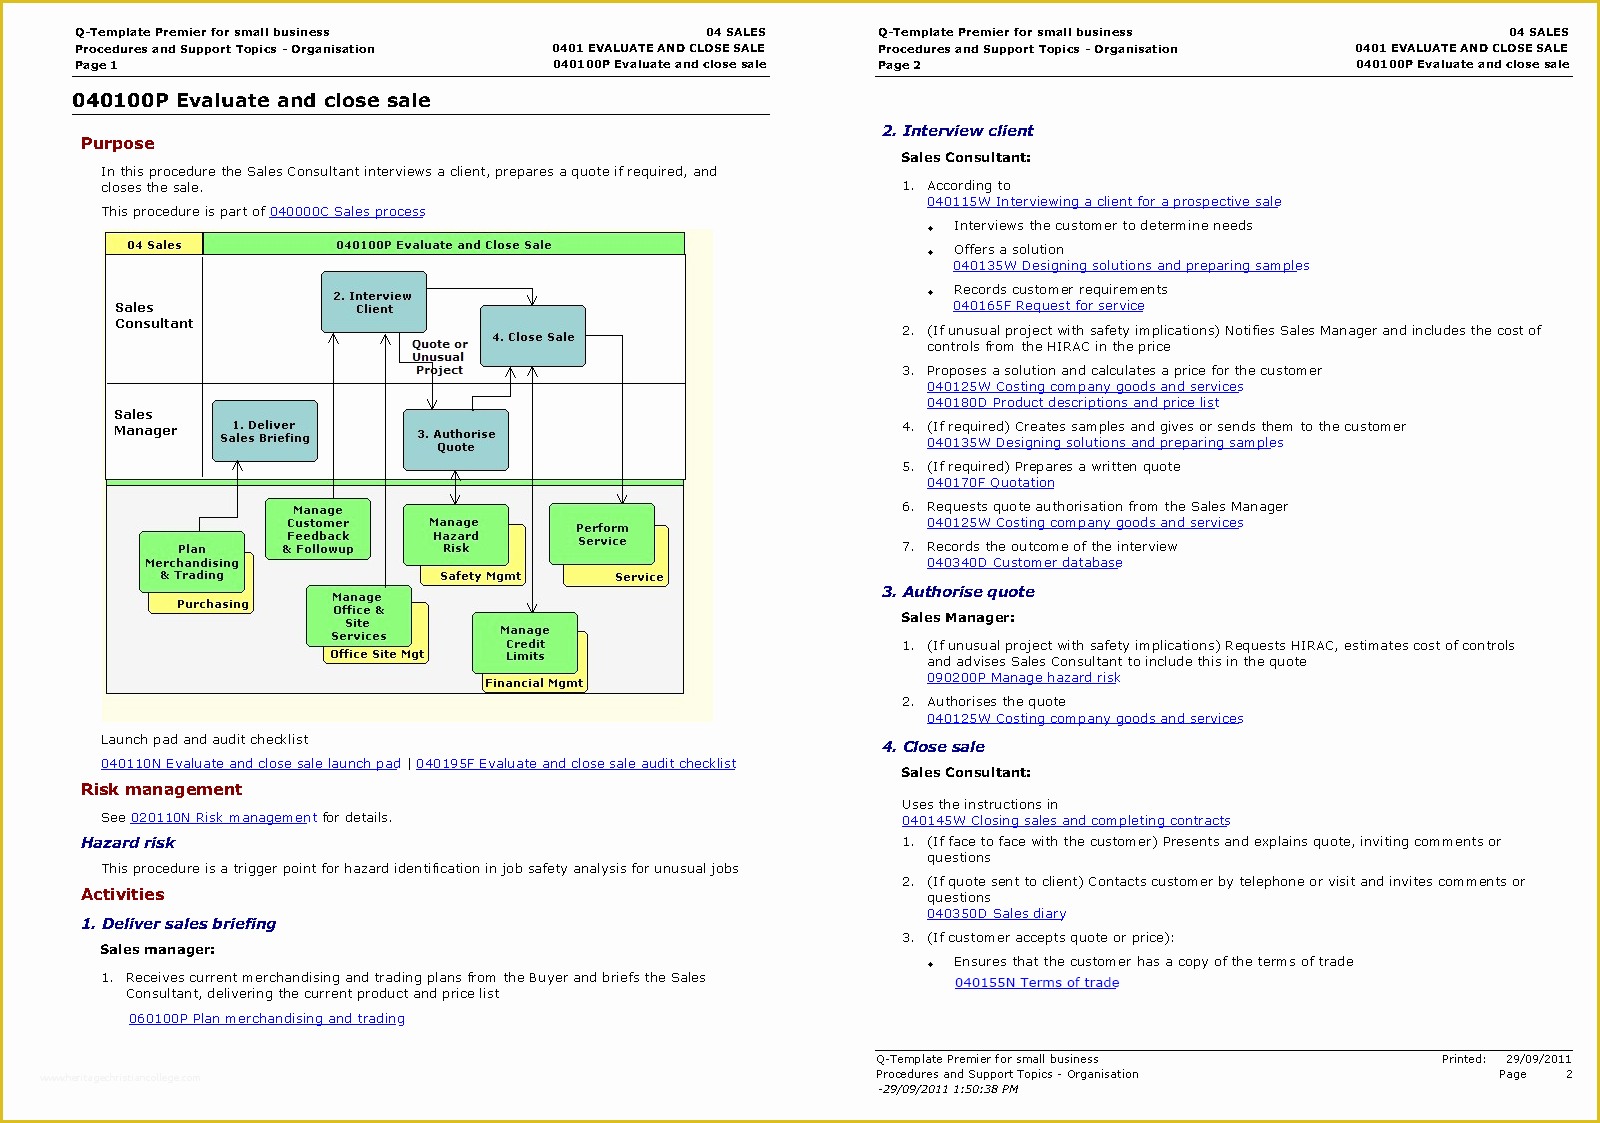 Process Manual Template Free Of the Q Template™ for Standards Pliant Intranet Procedure